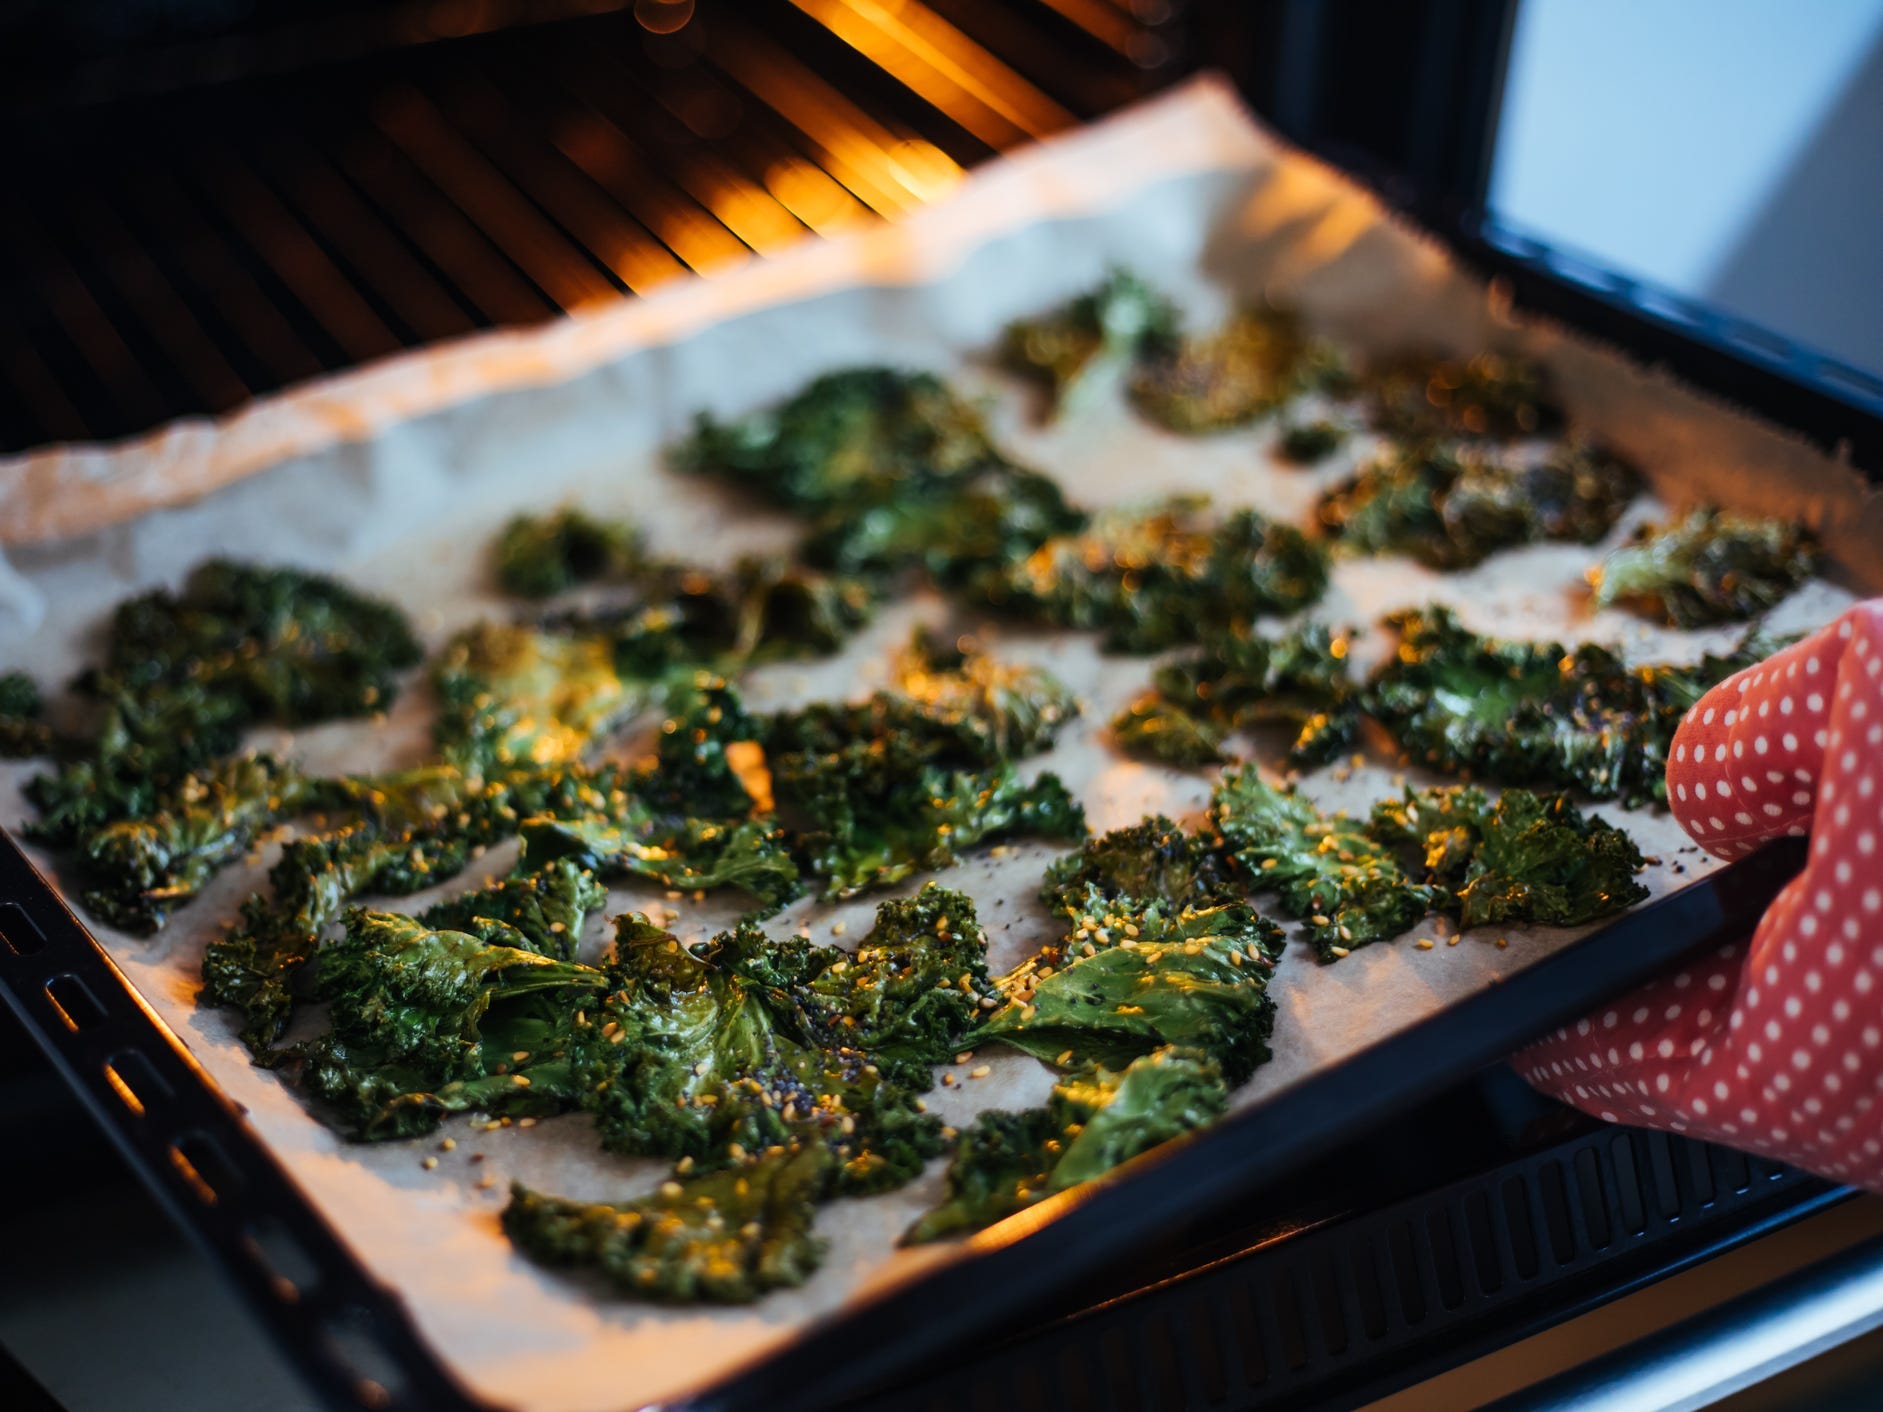 Kale chips coming out of the oven